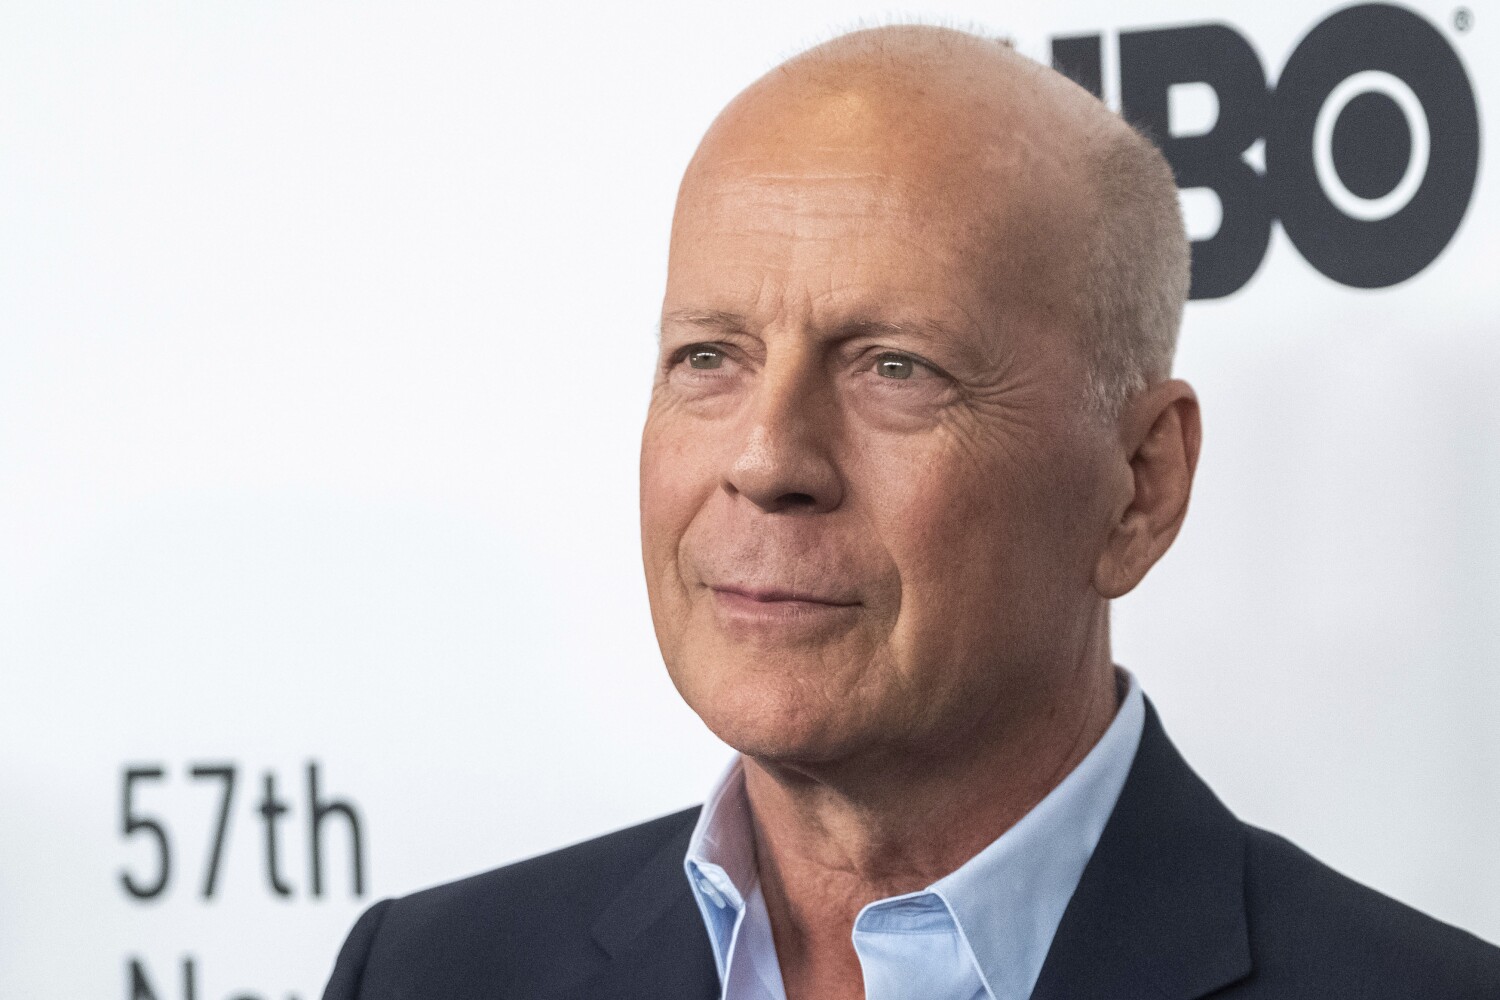 Frustrating, little-known disorder in spotlight after Bruce Willis' aphasia diagnosis